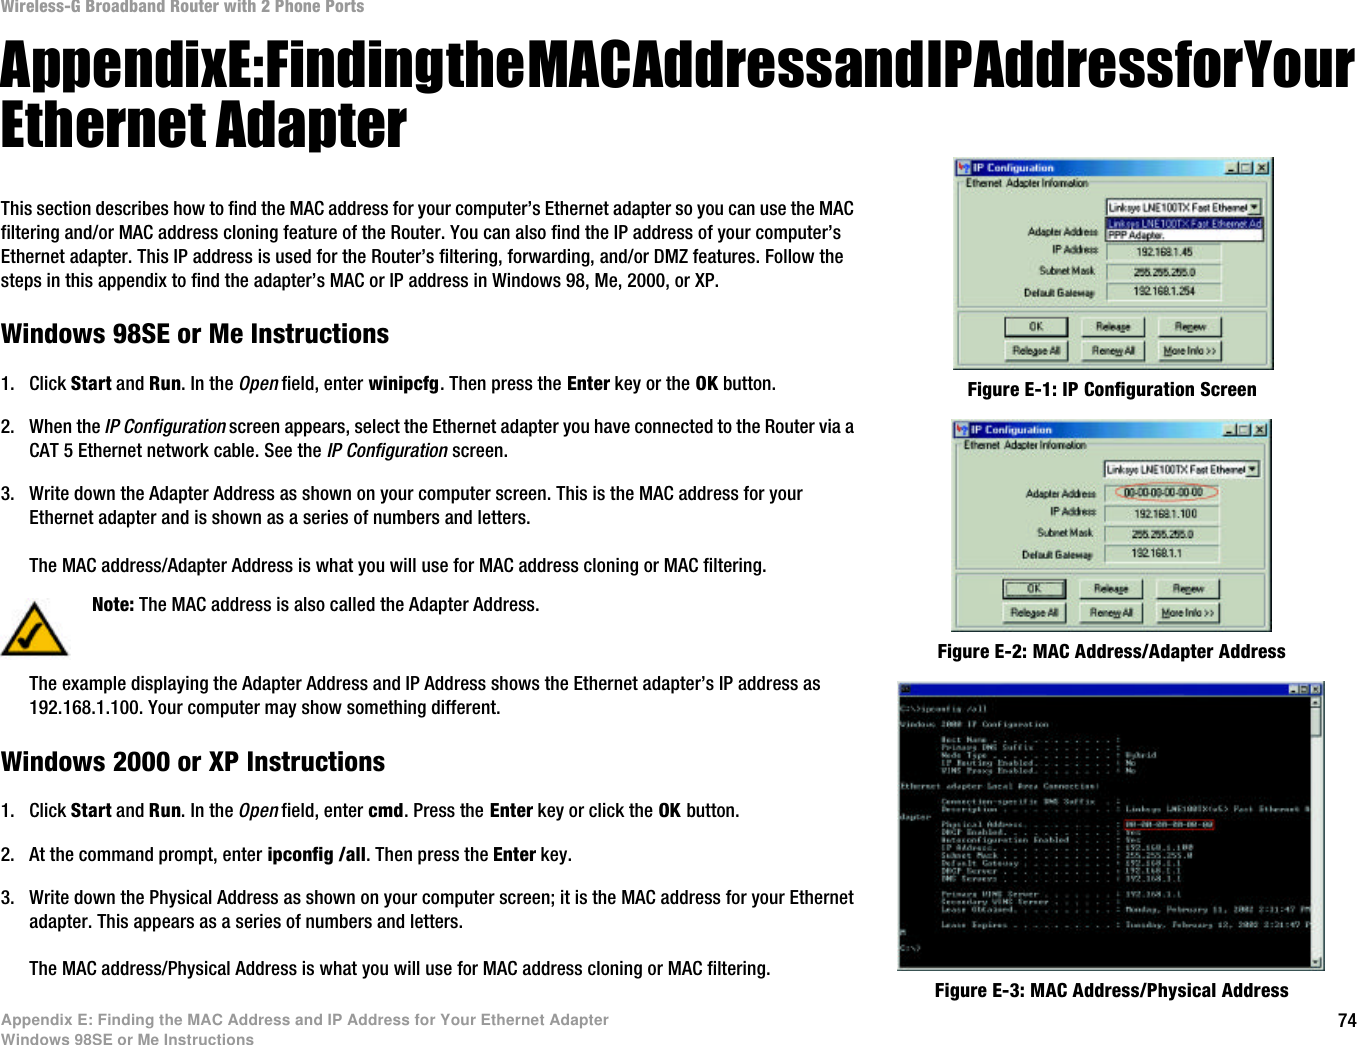 74Appendix E: Finding the MAC Address and IP Address for Your Ethernet AdapterWindows 98SE or Me InstructionsWireless-G Broadband Router with 2 Phone PortsAppendix E: Finding the MAC Address and IP Address for Your Ethernet AdapterThis section describes how to find the MAC address for your computer’s Ethernet adapter so you can use the MAC filtering and/or MAC address cloning feature of the Router. You can also find the IP address of your computer’s Ethernet adapter. This IP address is used for the Router’s filtering, forwarding, and/or DMZ features. Follow the steps in this appendix to find the adapter’s MAC or IP address in Windows 98, Me, 2000, or XP.Windows 98SE or Me Instructions1. Click Start and Run. In the Open field, enter winipcfg. Then press the Enter key or the OK button. 2. When the IP Configuration screen appears, select the Ethernet adapter you have connected to the Router via a CAT 5 Ethernet network cable. See the IP Configuration screen.3. Write down the Adapter Address as shown on your computer screen. This is the MAC address for your Ethernet adapter and is shown as a series of numbers and letters.The MAC address/Adapter Address is what you will use for MAC address cloning or MAC filtering.The example displaying the Adapter Address and IP Address shows the Ethernet adapter’s IP address as 192.168.1.100. Your computer may show something different.Windows 2000 or XP Instructions1. Click Start and Run. In the Open field, enter cmd. Press the Enter key or click the OK button.2. At the command prompt, enter ipconfig /all. Then press the Enter key.3. Write down the Physical Address as shown on your computer screen; it is the MAC address for your Ethernet adapter. This appears as a series of numbers and letters.The MAC address/Physical Address is what you will use for MAC address cloning or MAC filtering.Figure E-2: MAC Address/Adapter AddressFigure E-1: IP Configuration ScreenNote: The MAC address is also called the Adapter Address.Figure E-3: MAC Address/Physical Address